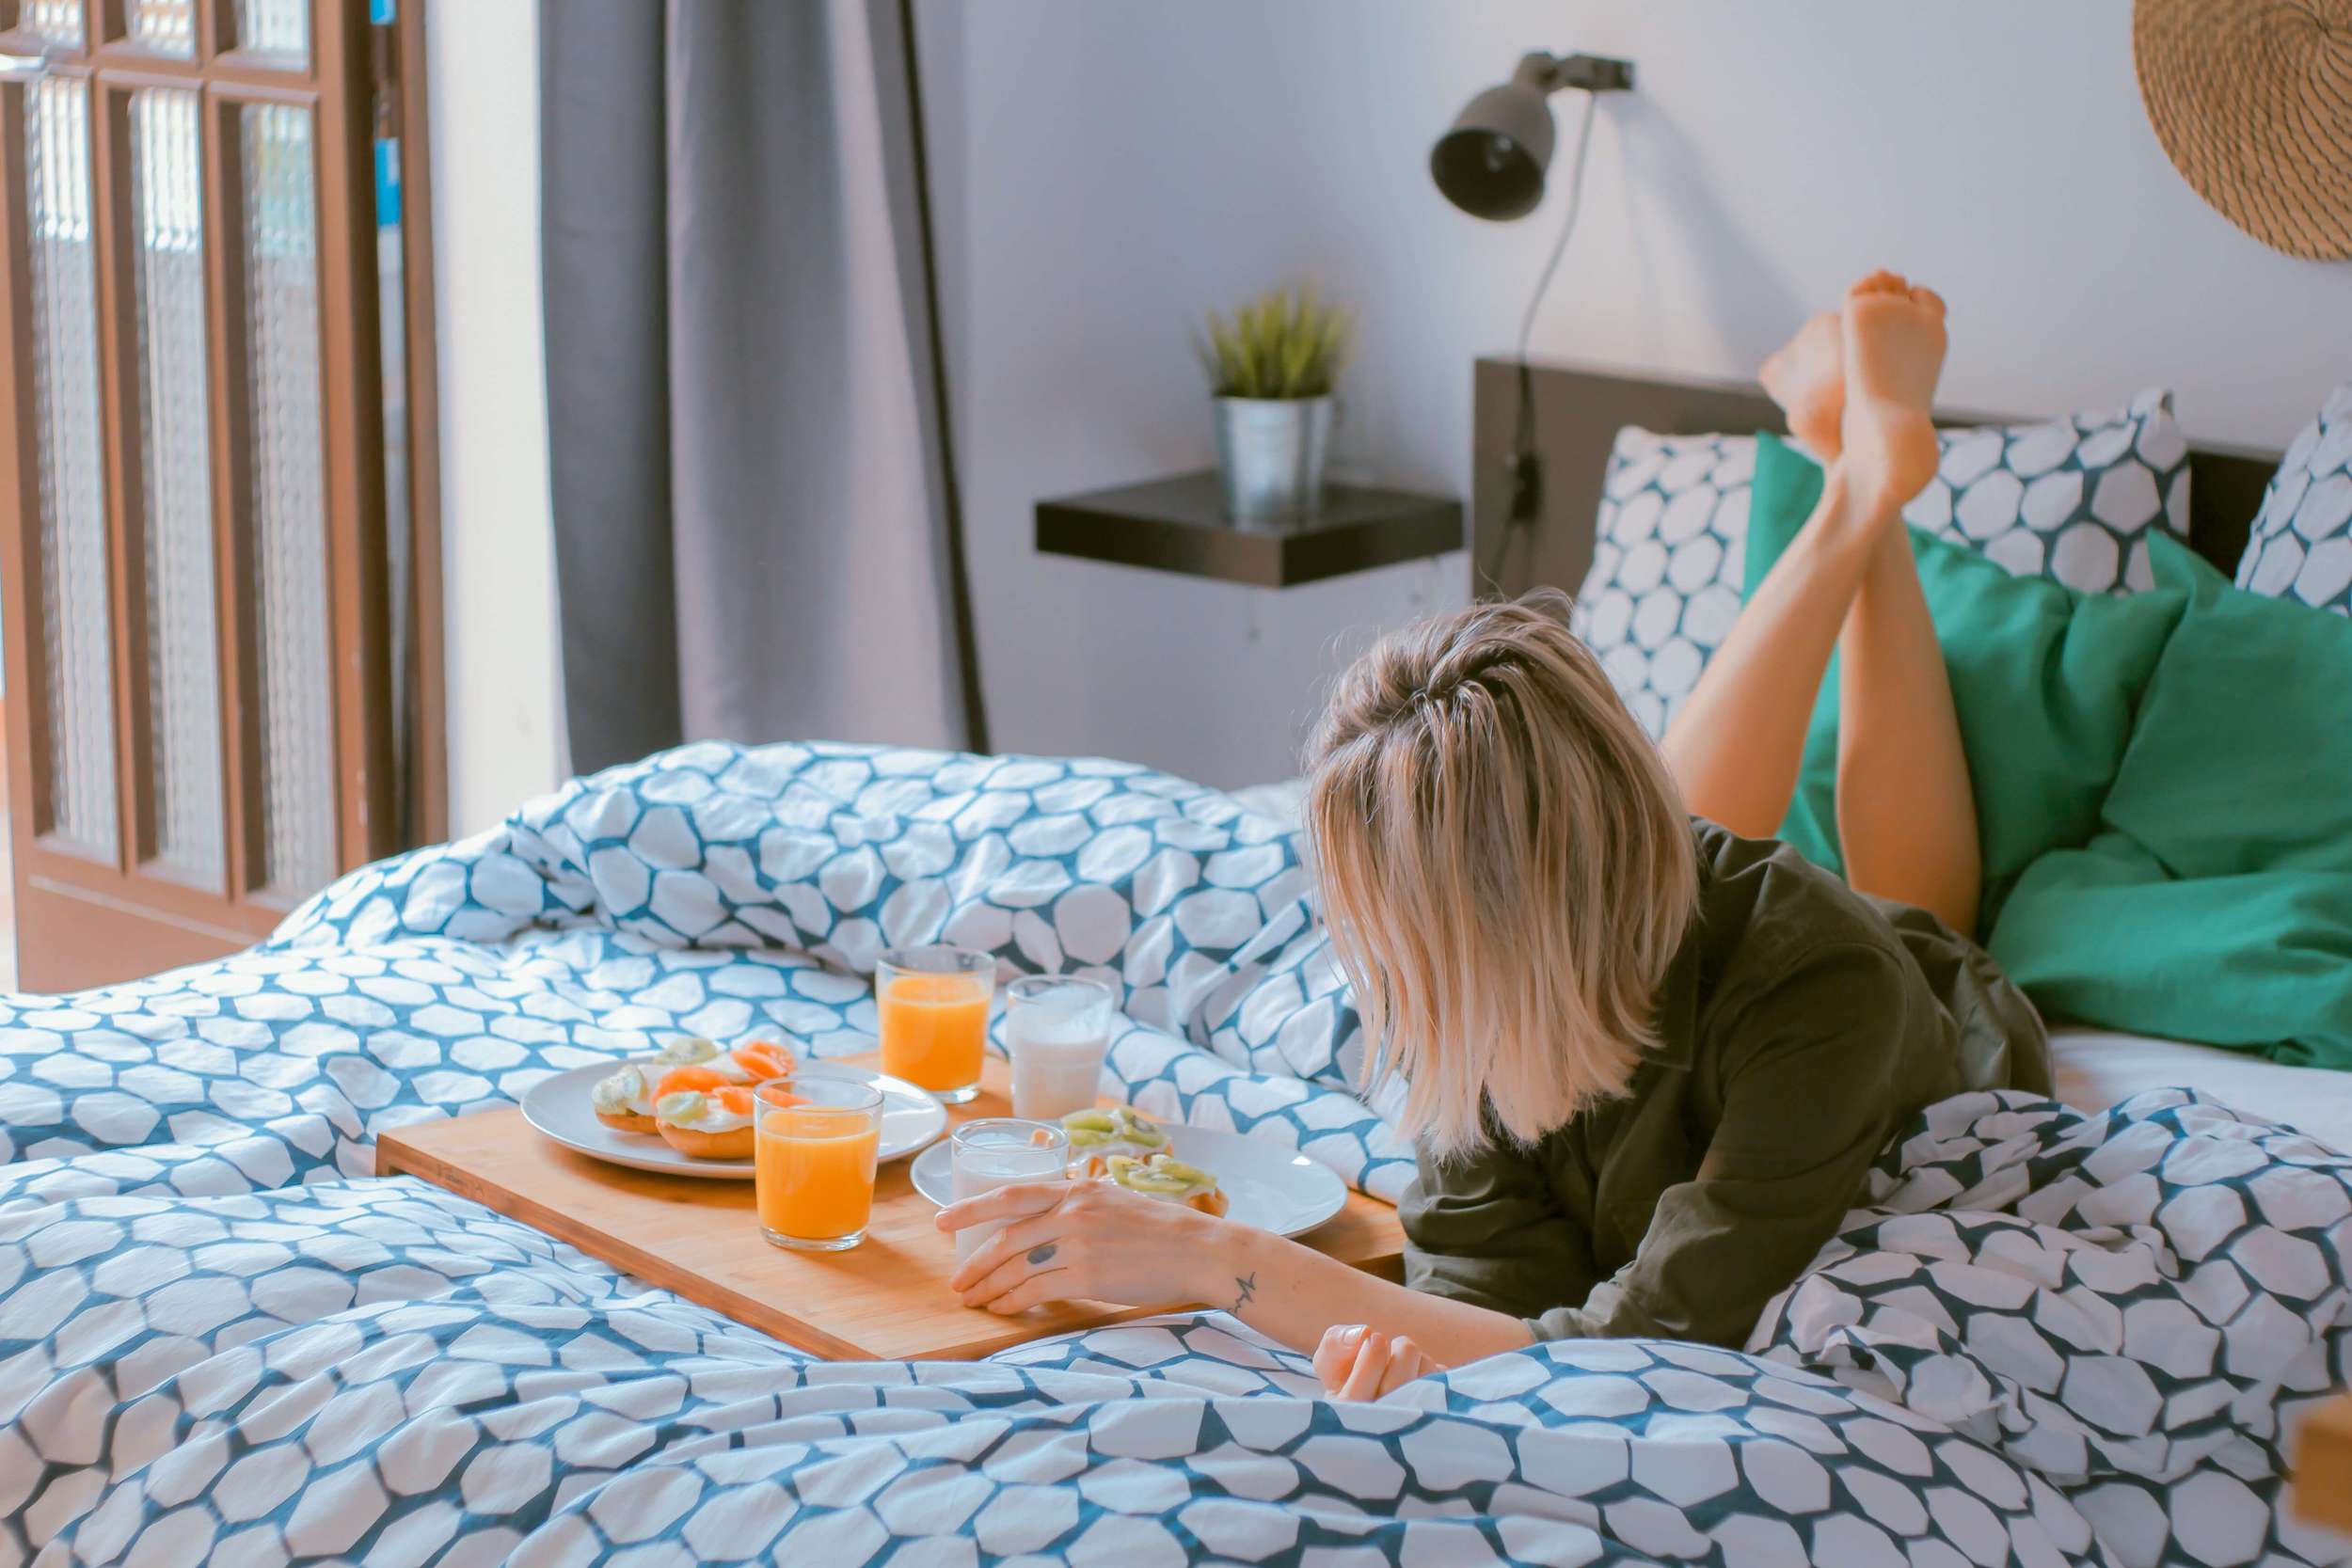 Woman on the bed at home keeping healthy habits in the new normal